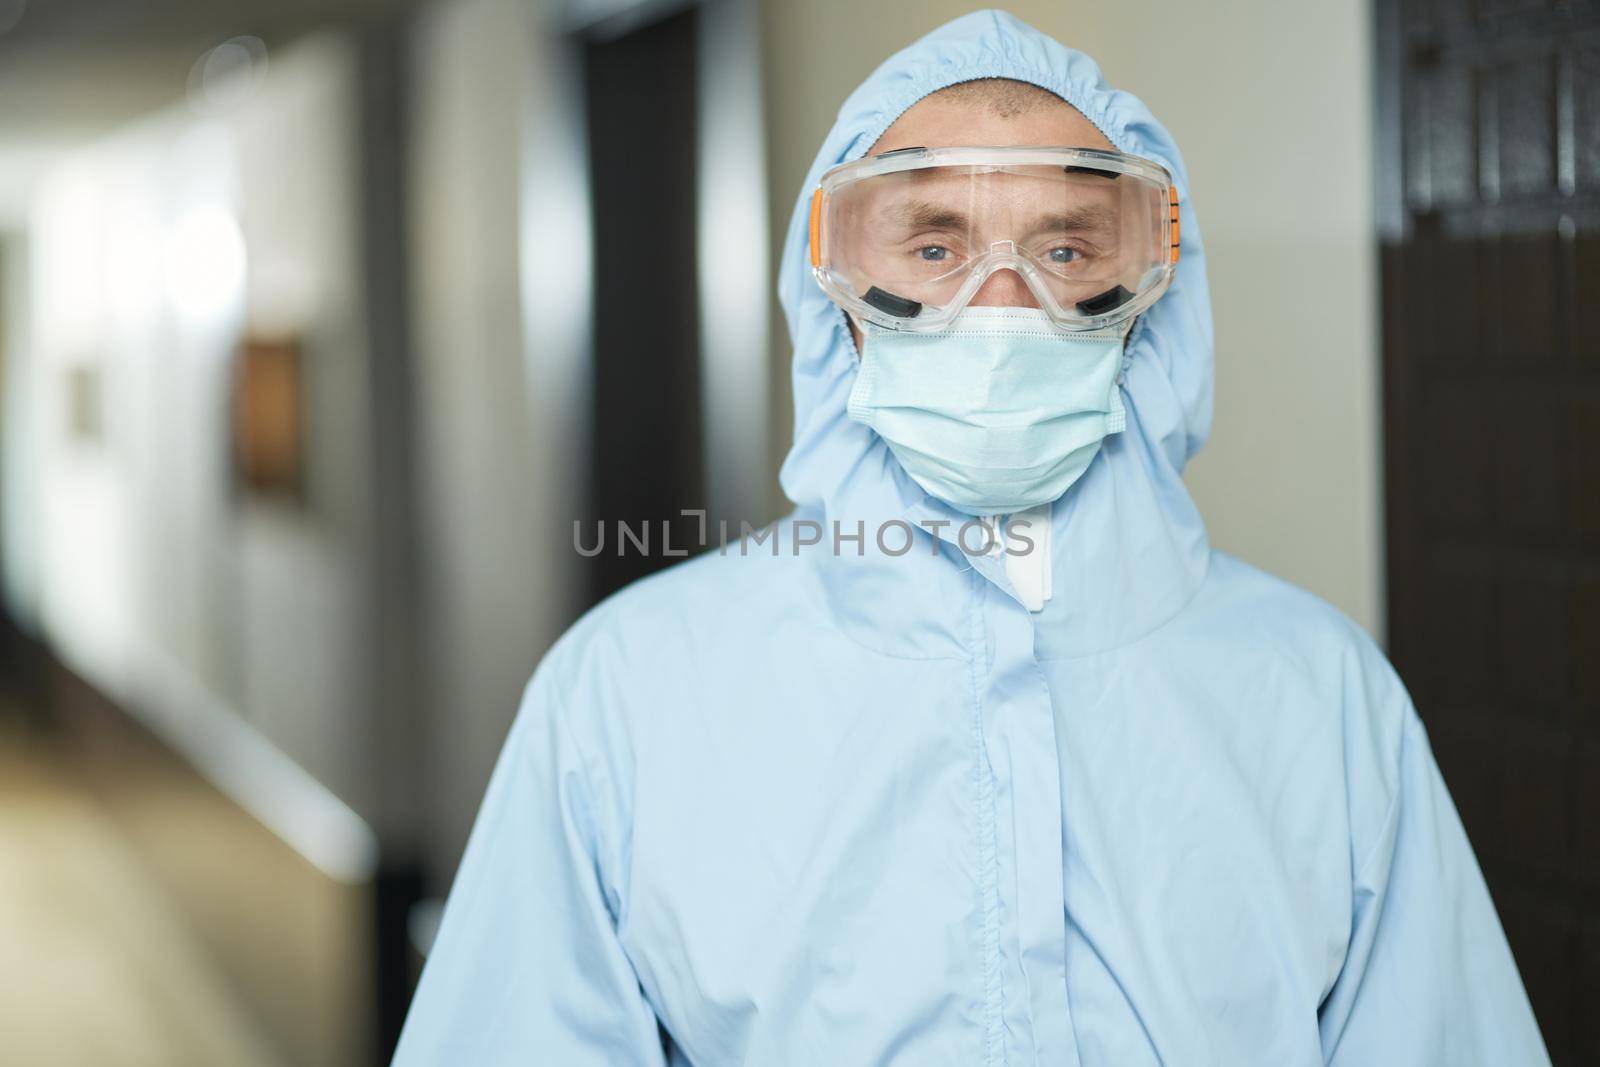 Waist up of worker in protective clothing and suit standing in the hotel corridor. Coronavirus and quarantine concept